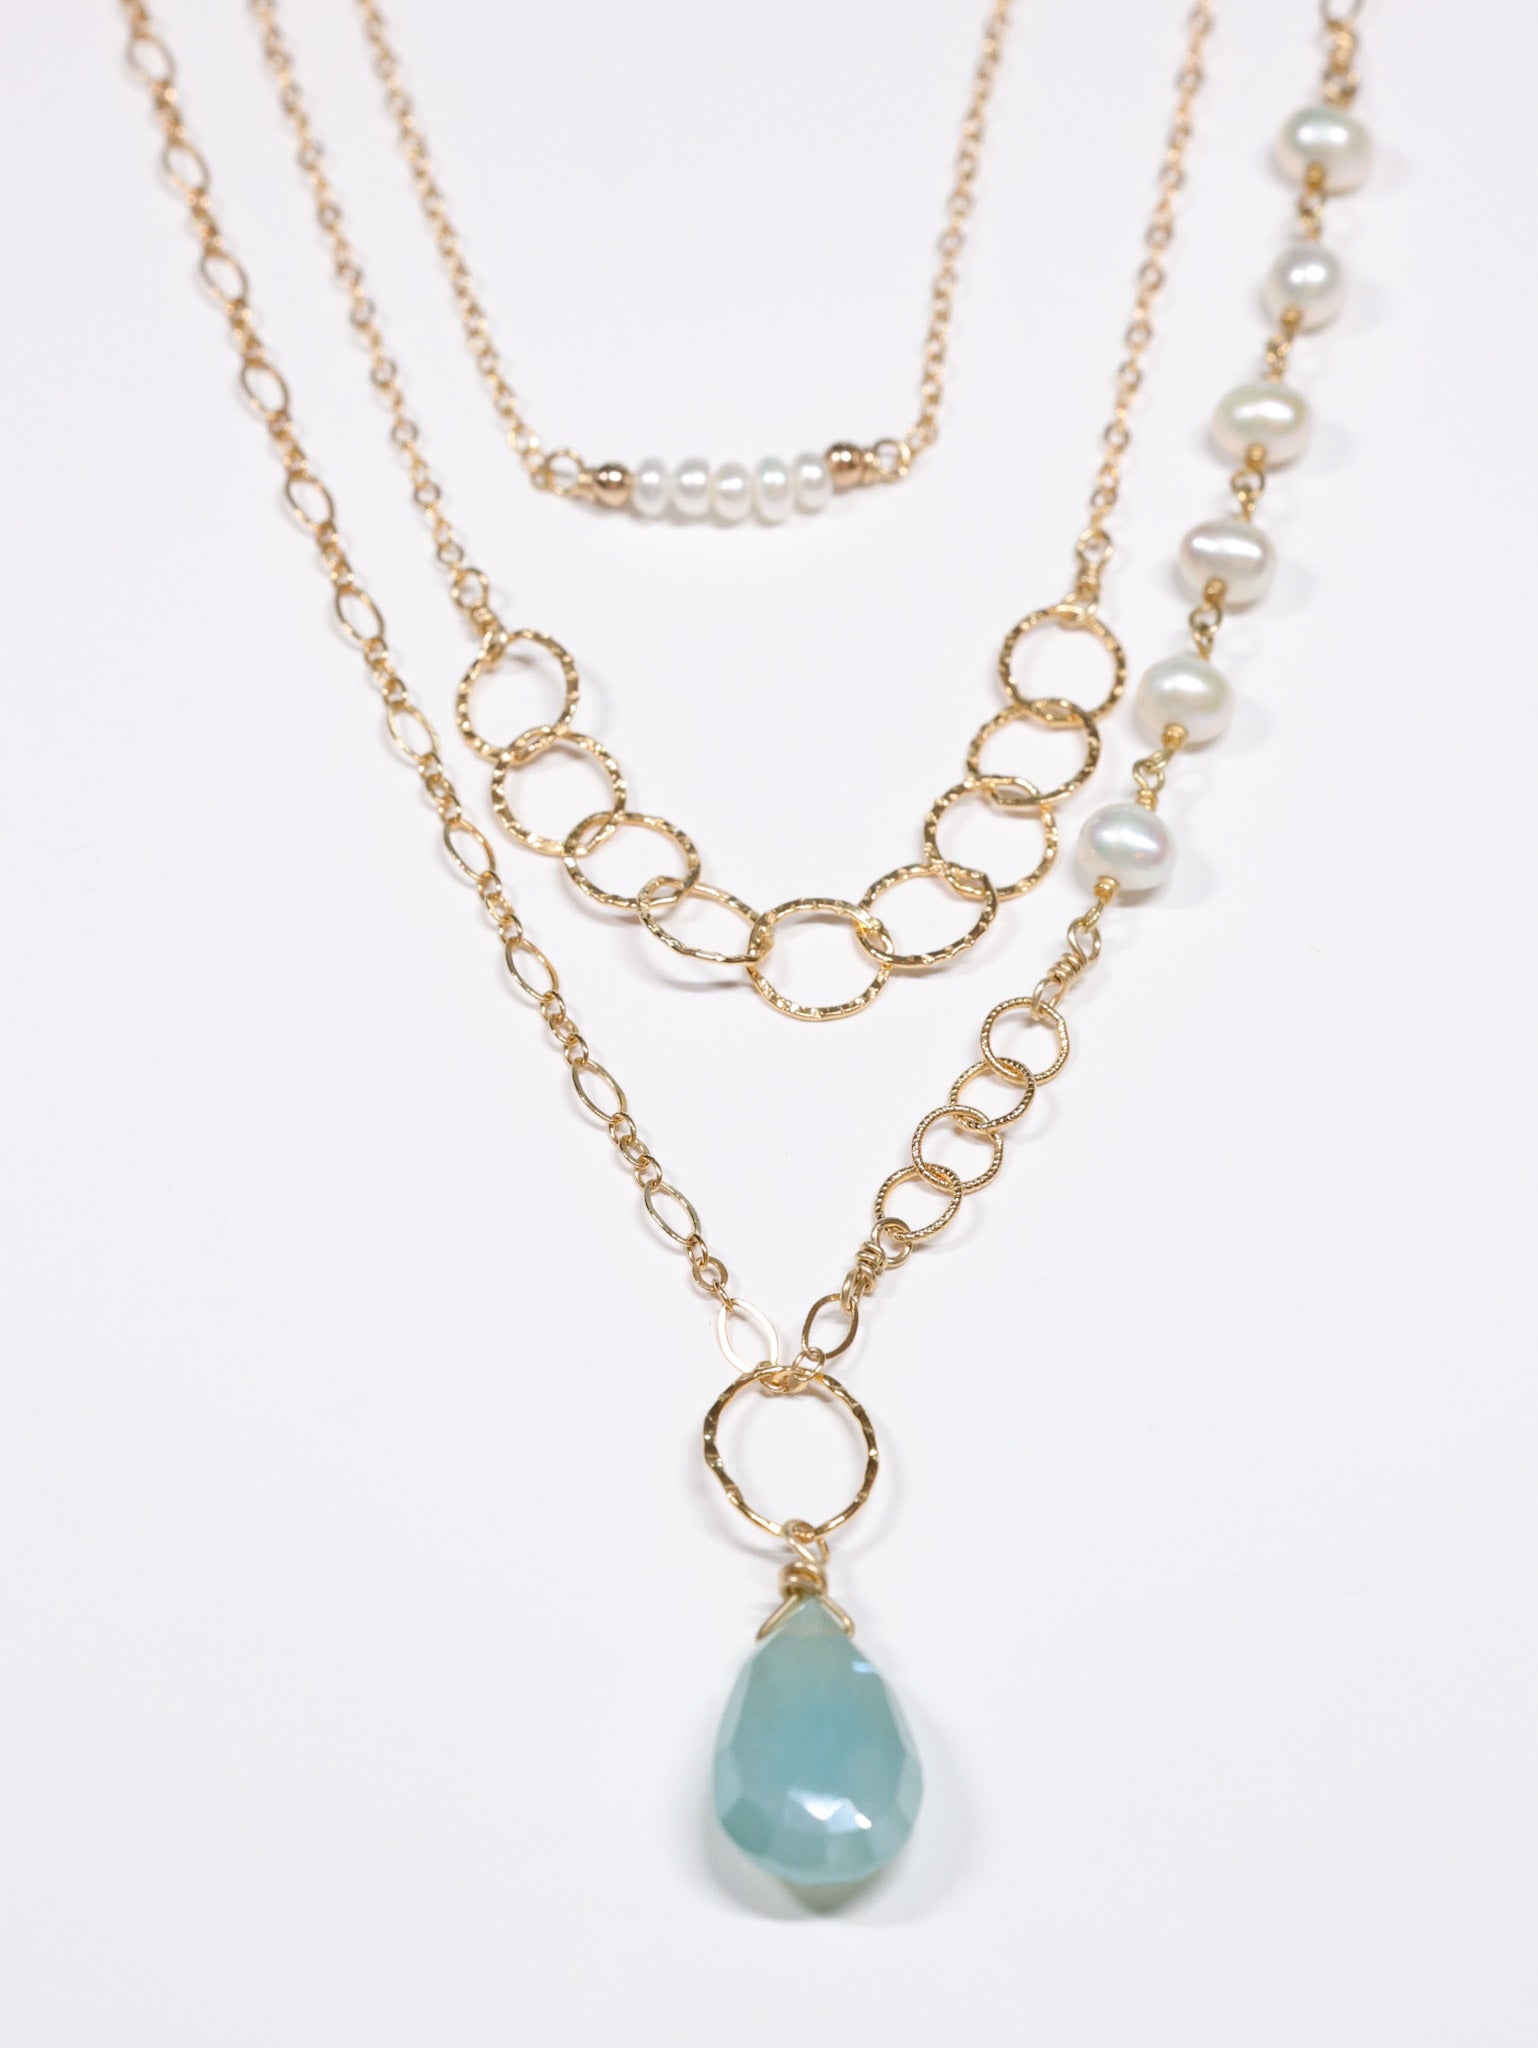 Cecilia nh necklace in gold